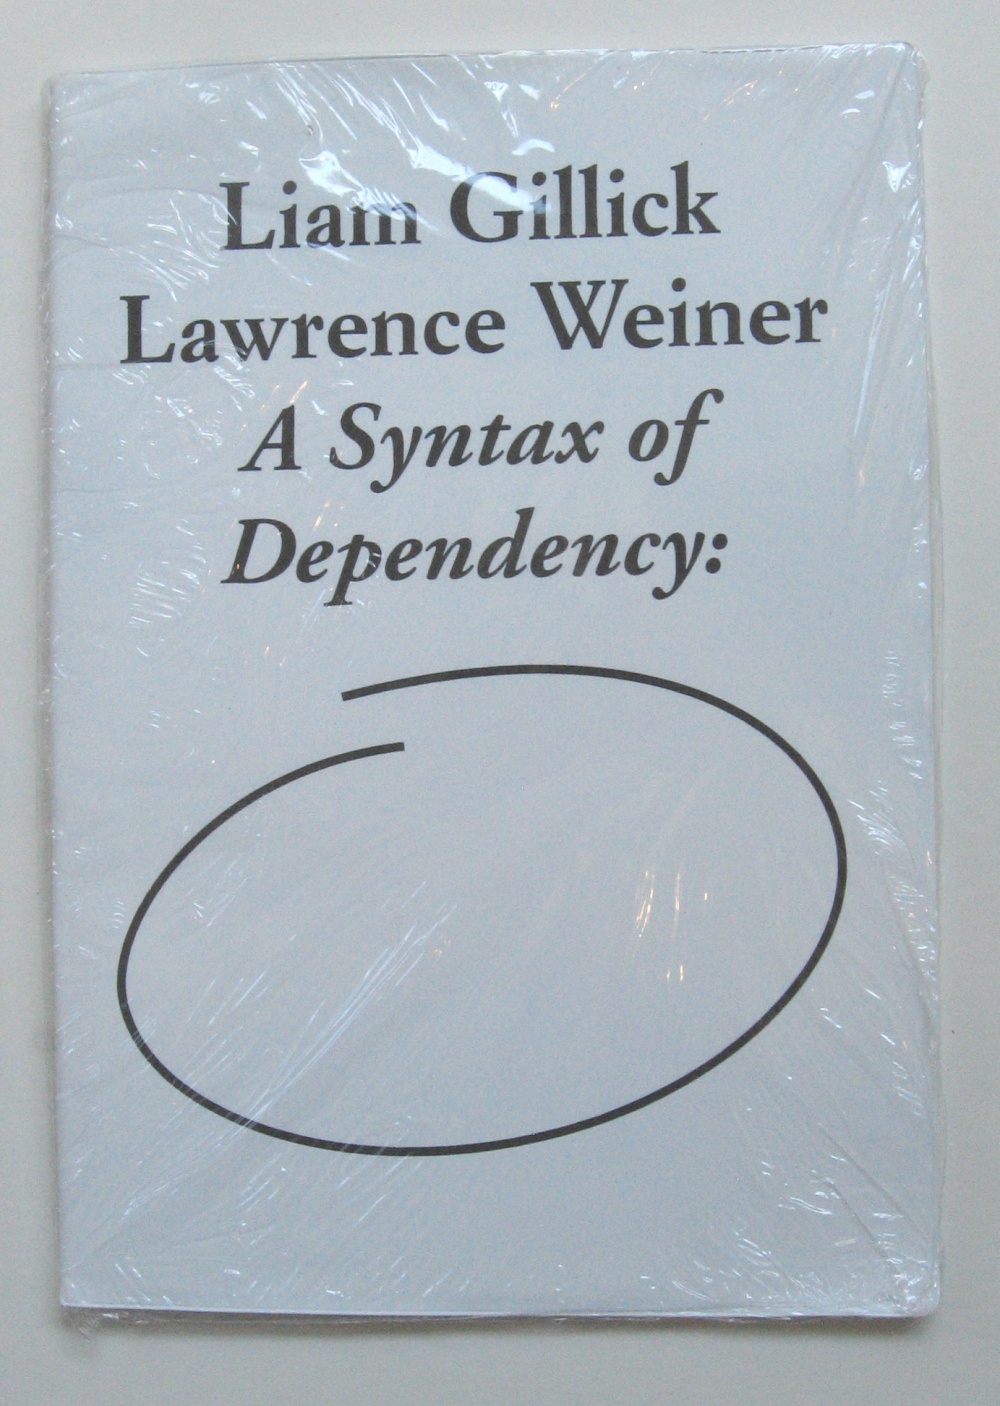 A Syntax of Dependency